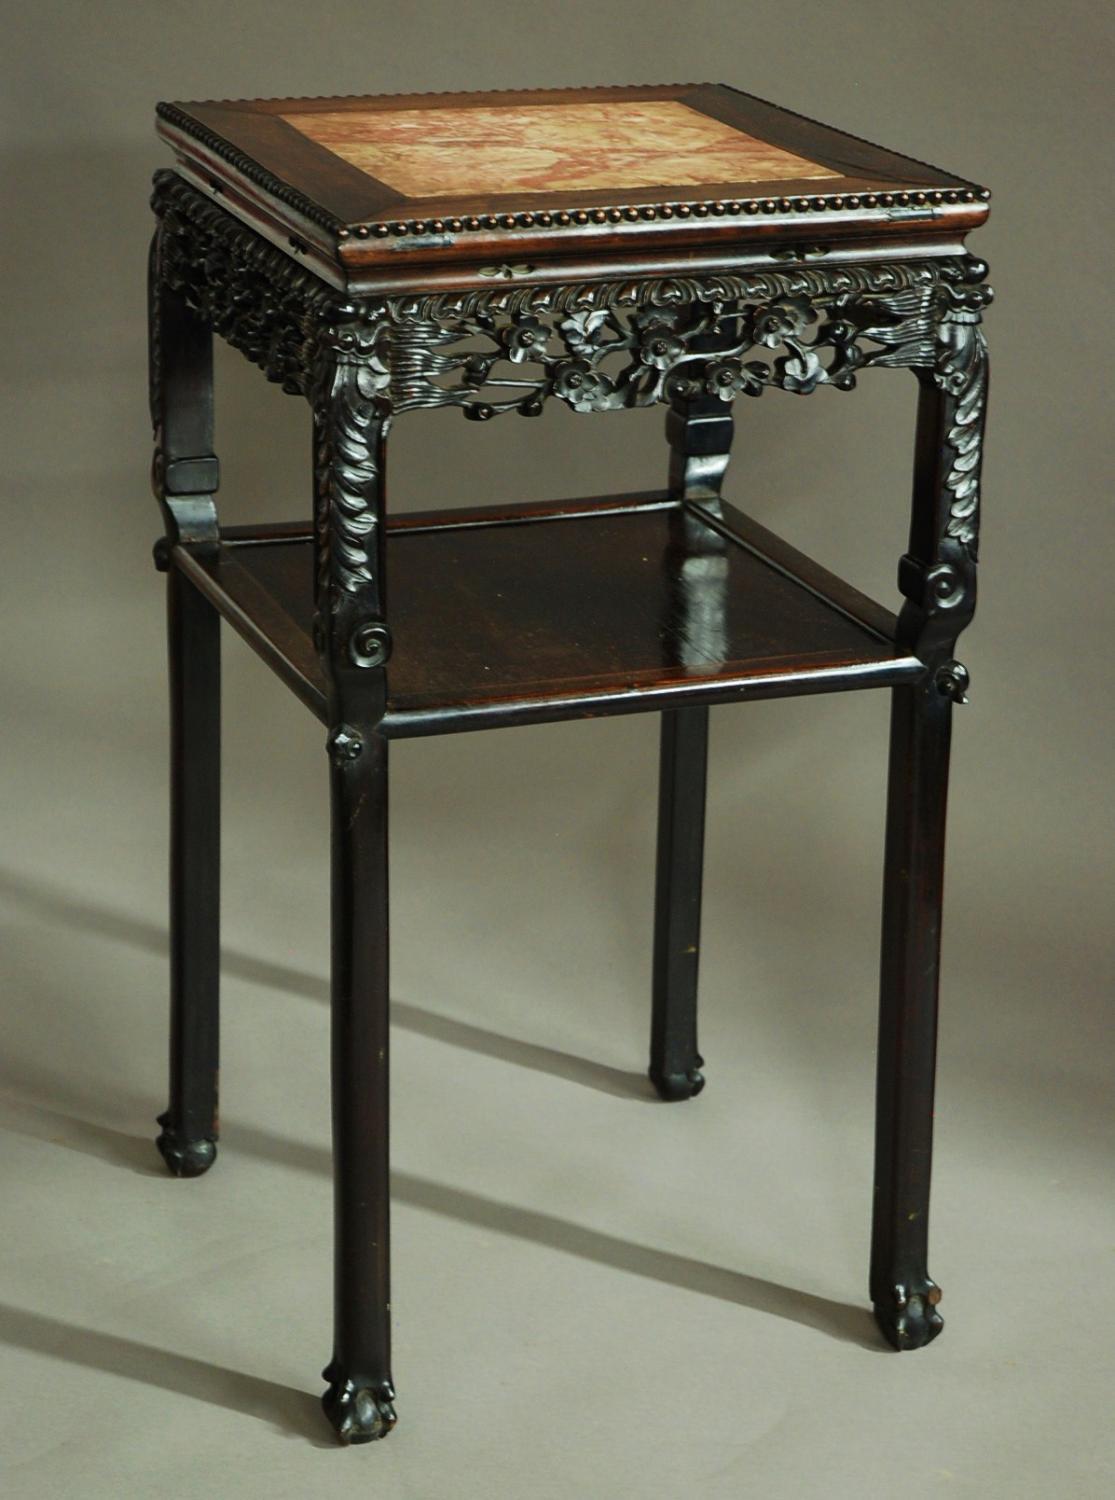 19th century square Chinese pot stand